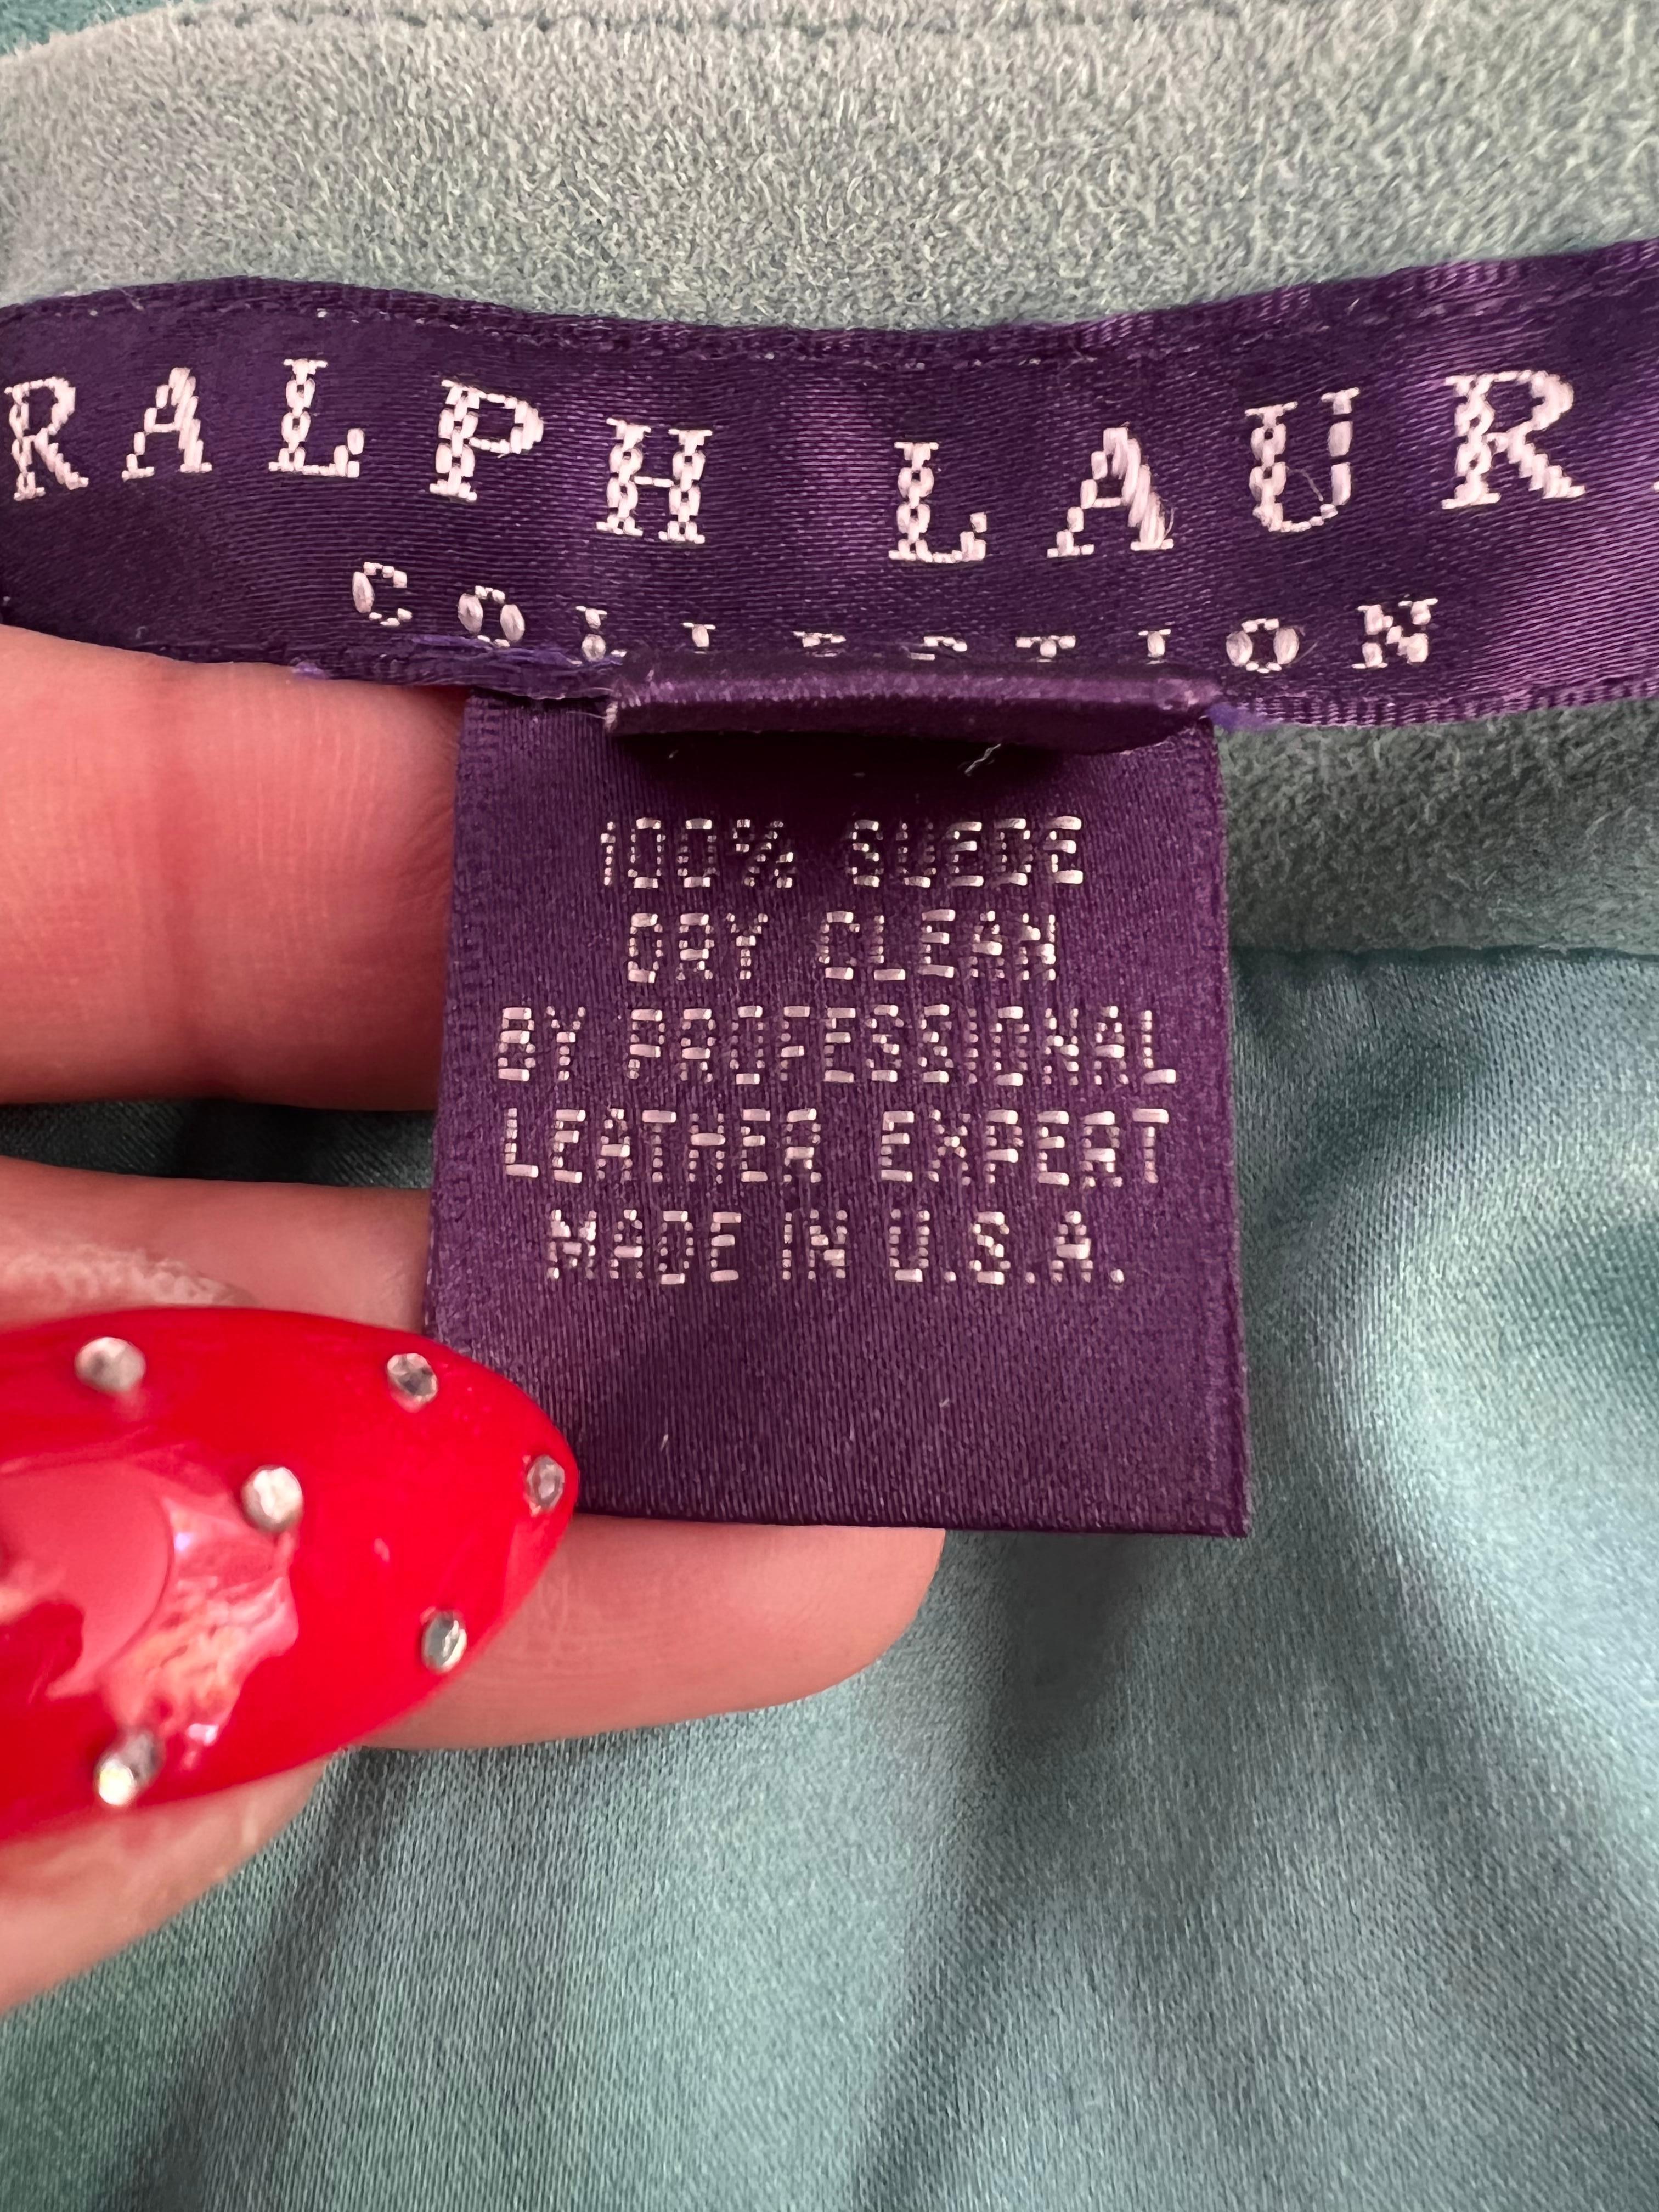 Ralph Lauren Turquoise Suede Capri Pants, Size 9 In Excellent Condition For Sale In Beverly Hills, CA